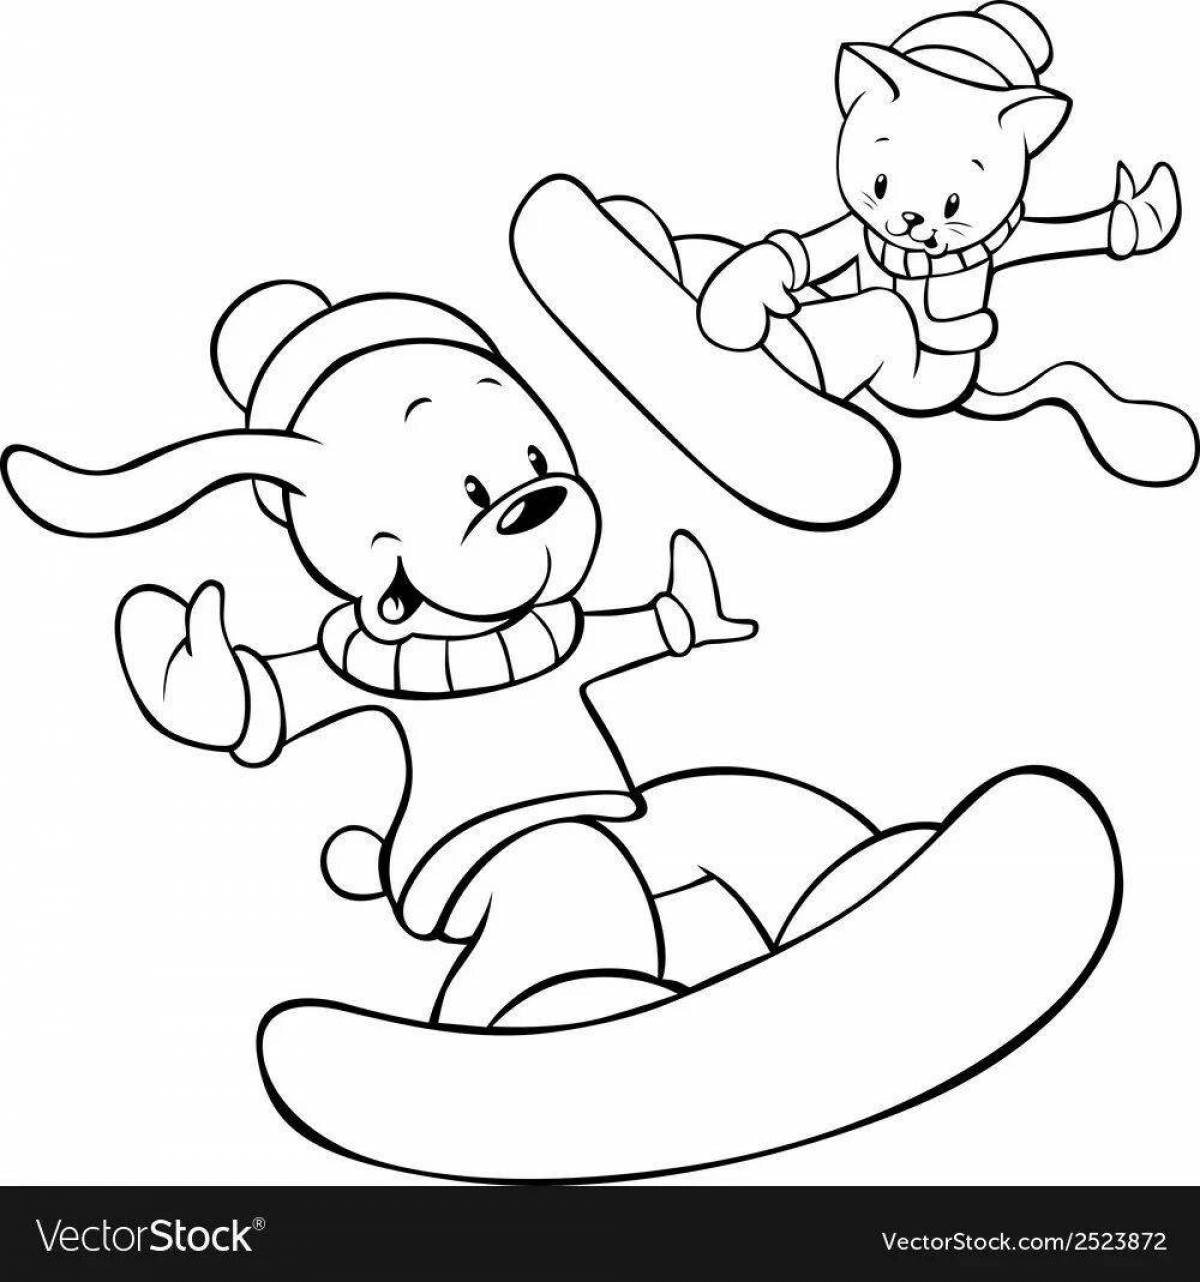 Color-explosive snowboard coloring page for kids